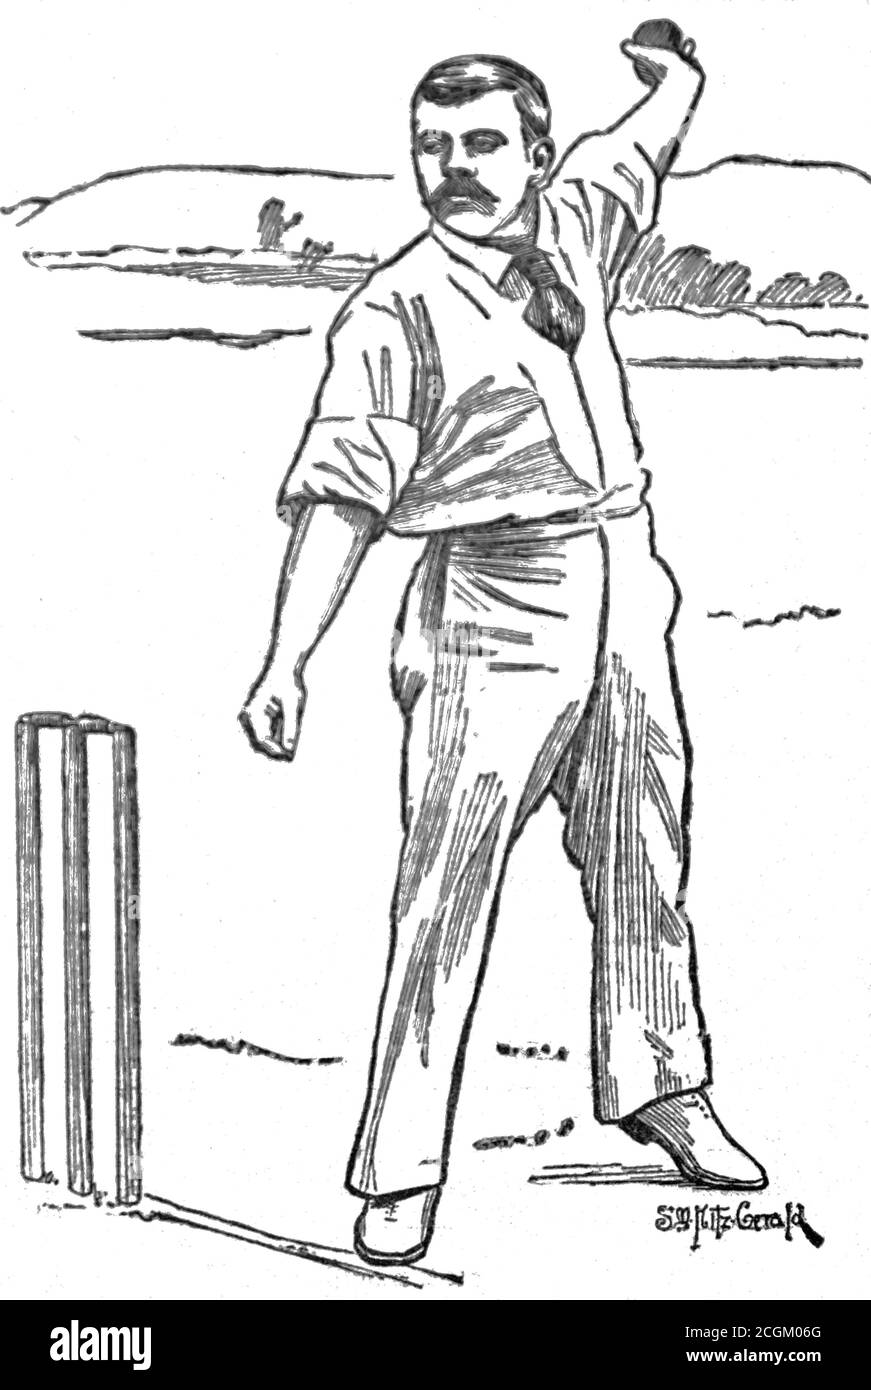 A historical contemporary newspaper cutting of renowed cricketer John Briggs from the Daily Magazine of the Daily Mail, 13th January 1902 shortly after his death. Stock Photo